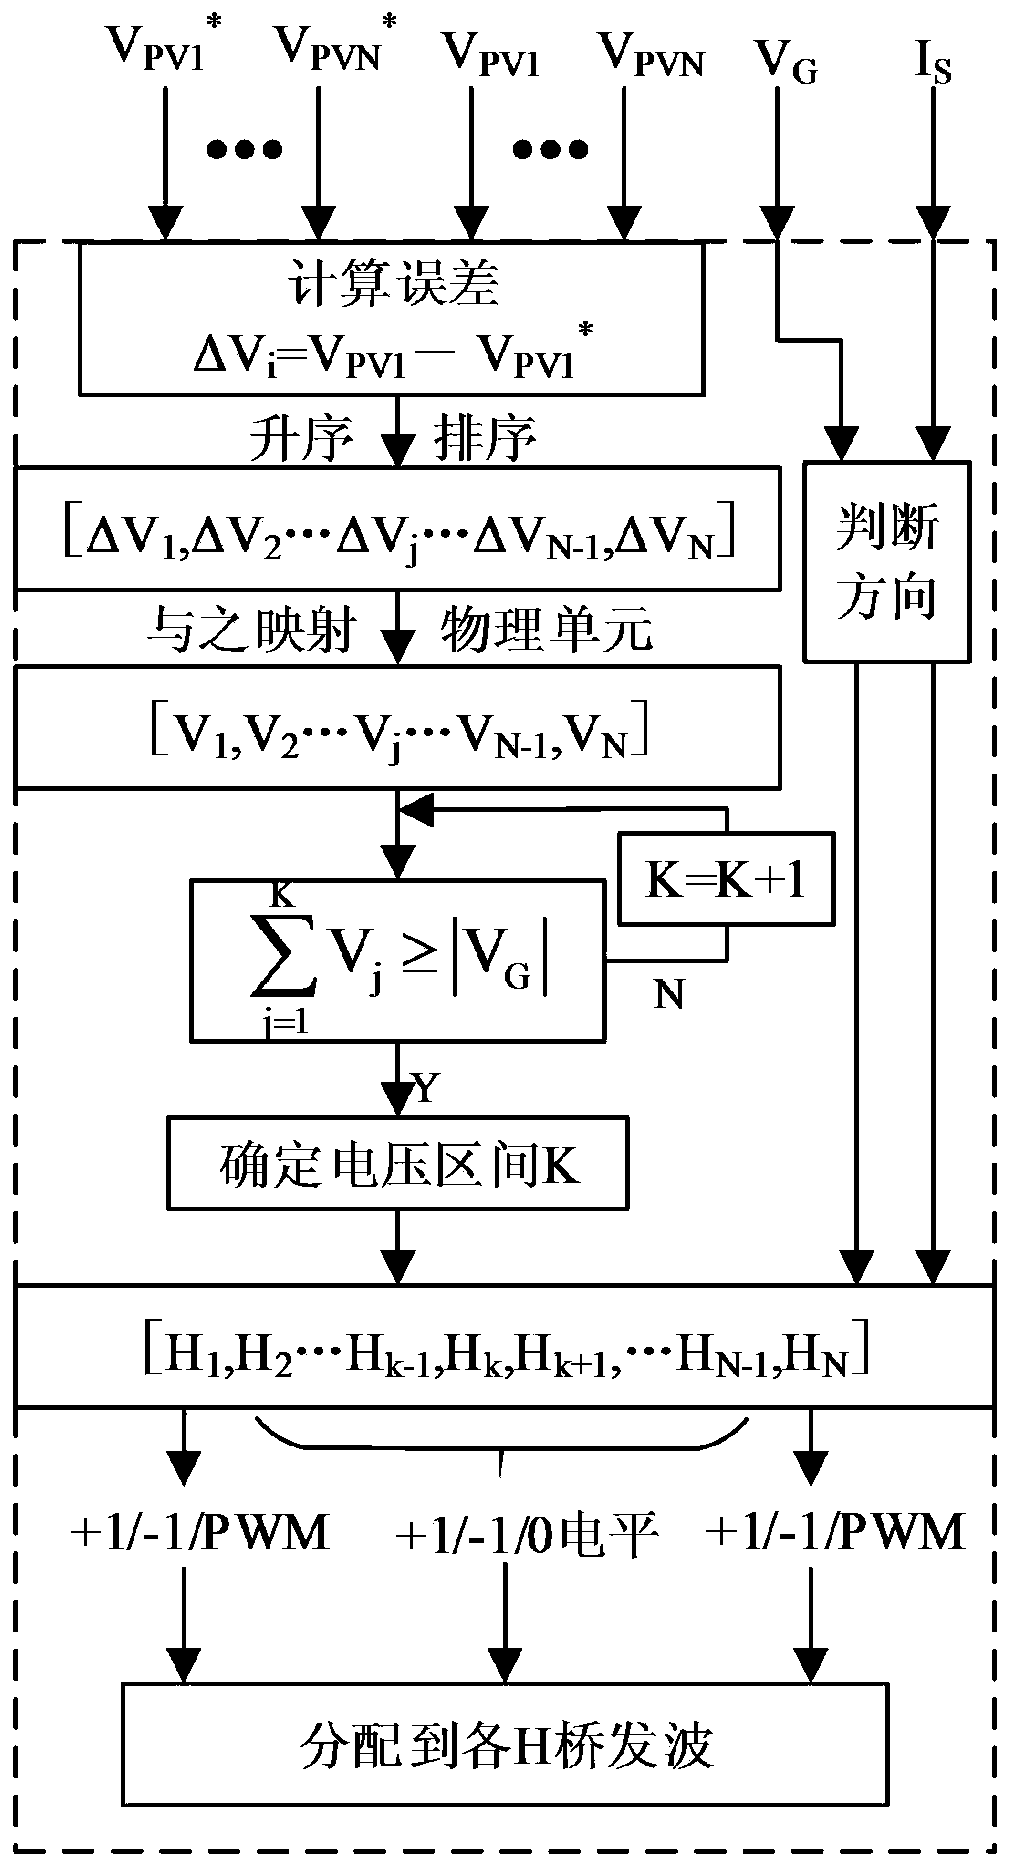 Power Balance Control Method for Reducing DC Voltage Fluctuation of Cascaded H-Bridge Inverters